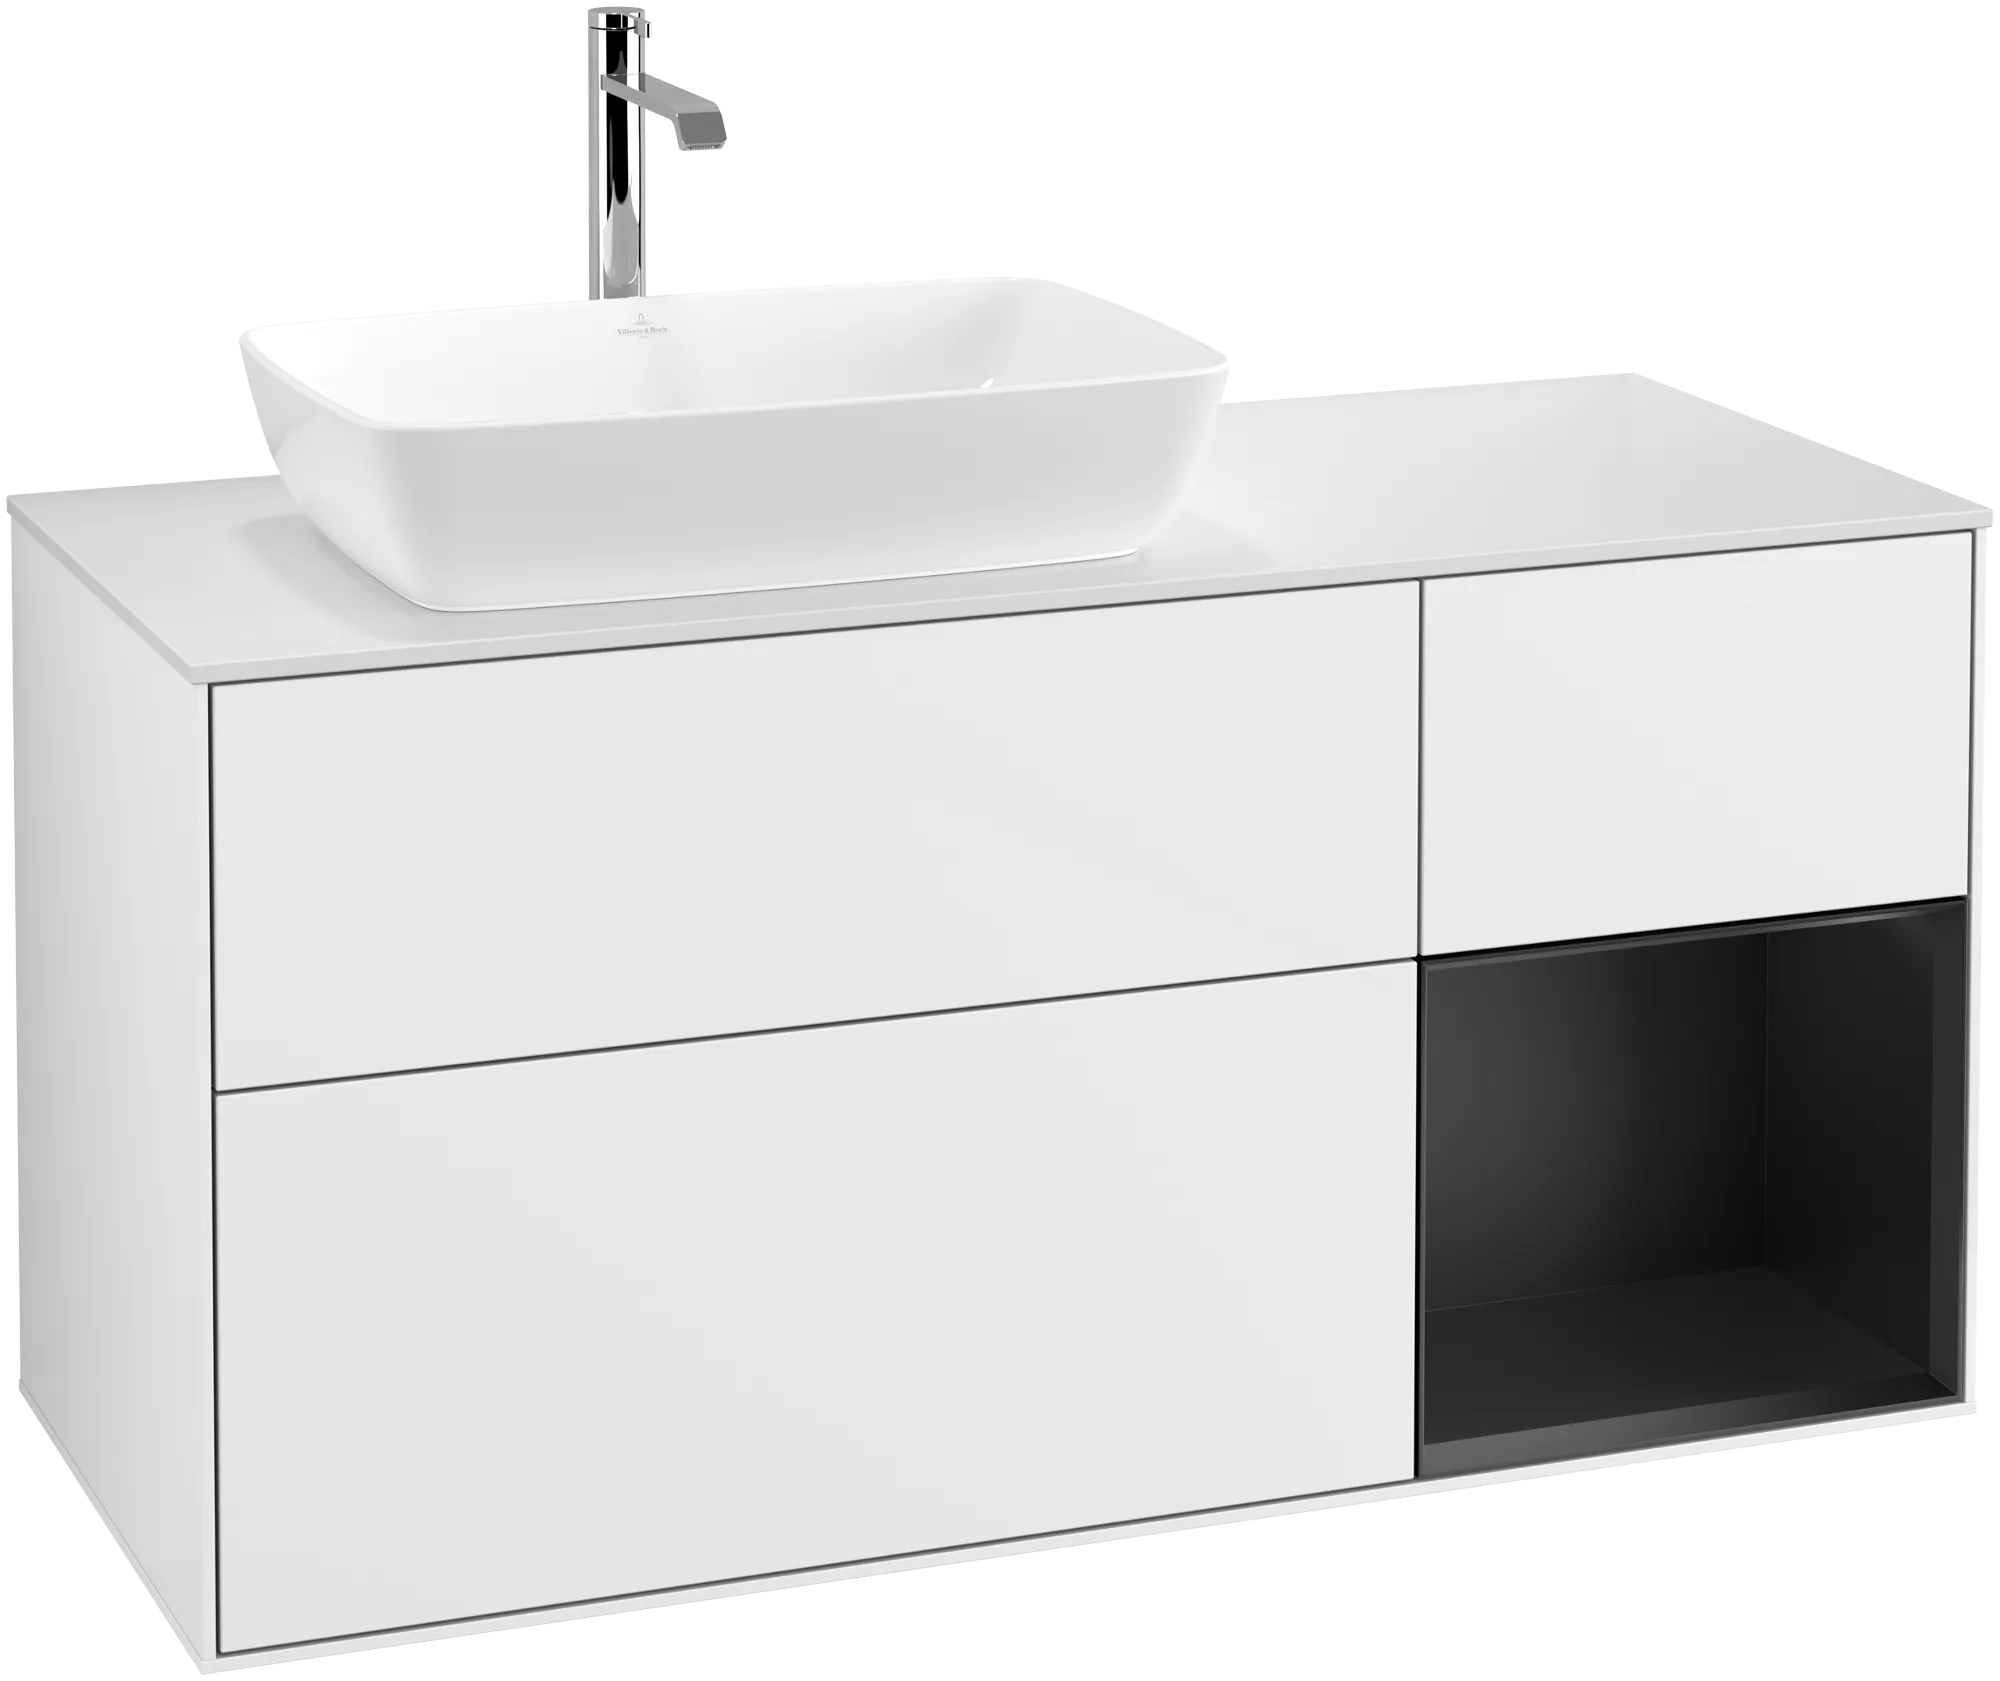 Obrázek VILLEROY BOCH Finion Vanity unit, with lighting, 3 pull-out compartments, 1200 x 603 x 501 mm, Glossy White Lacquer / Black Matt Lacquer / Glass White Matt #G811PDGF